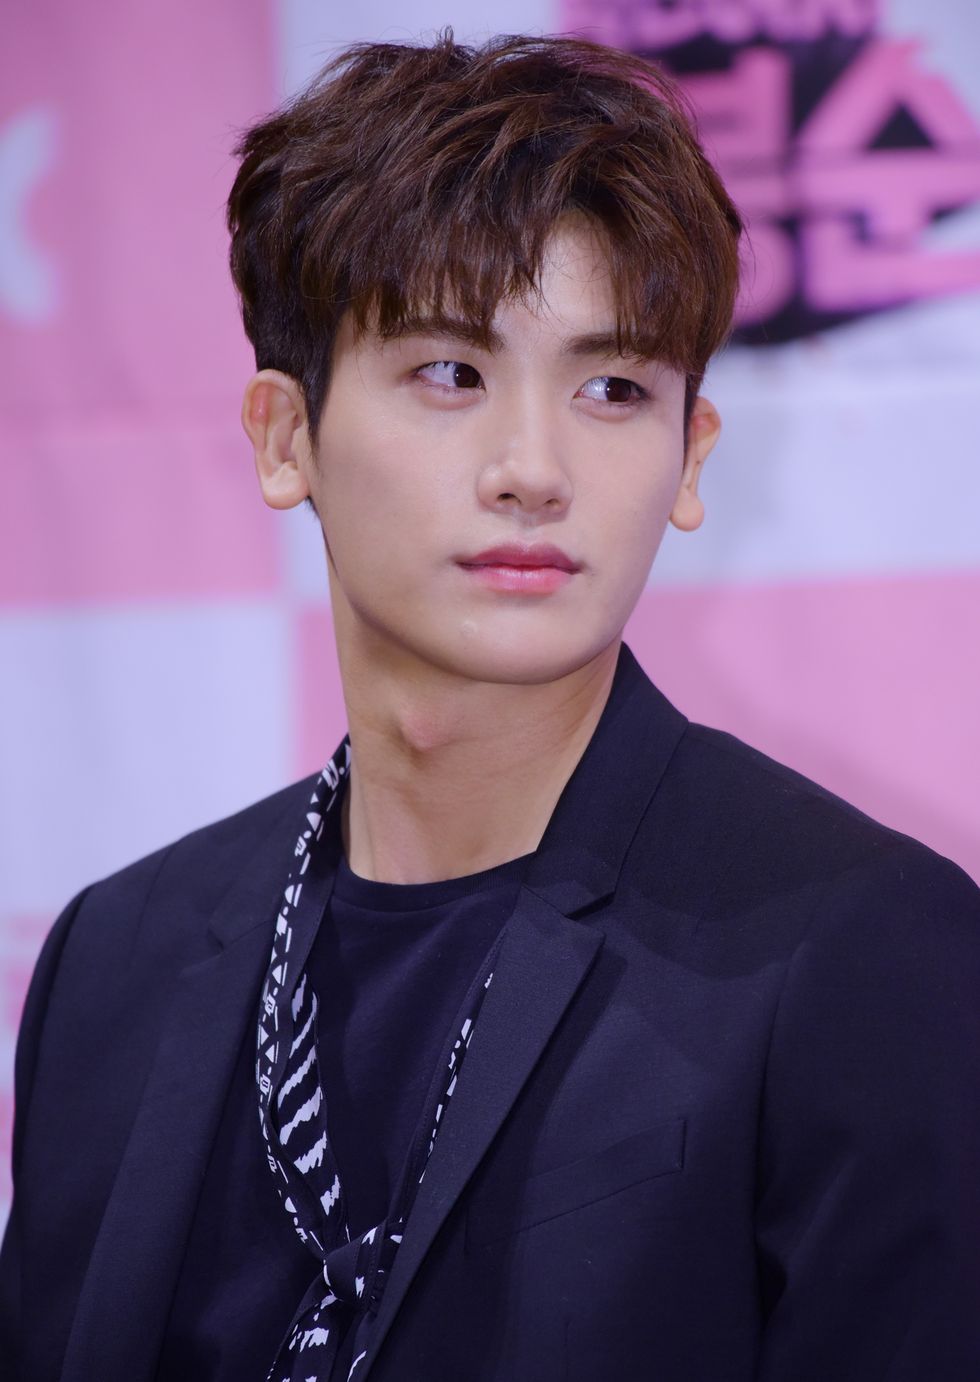 seoul, south korea february 22 actor park hyung sik during jtbc drama 'strong girl bong soon' press conference at conrad hotel on february 22, 2017 in seoul, south korea photo by the chosunilbo jnsimazins via getty images